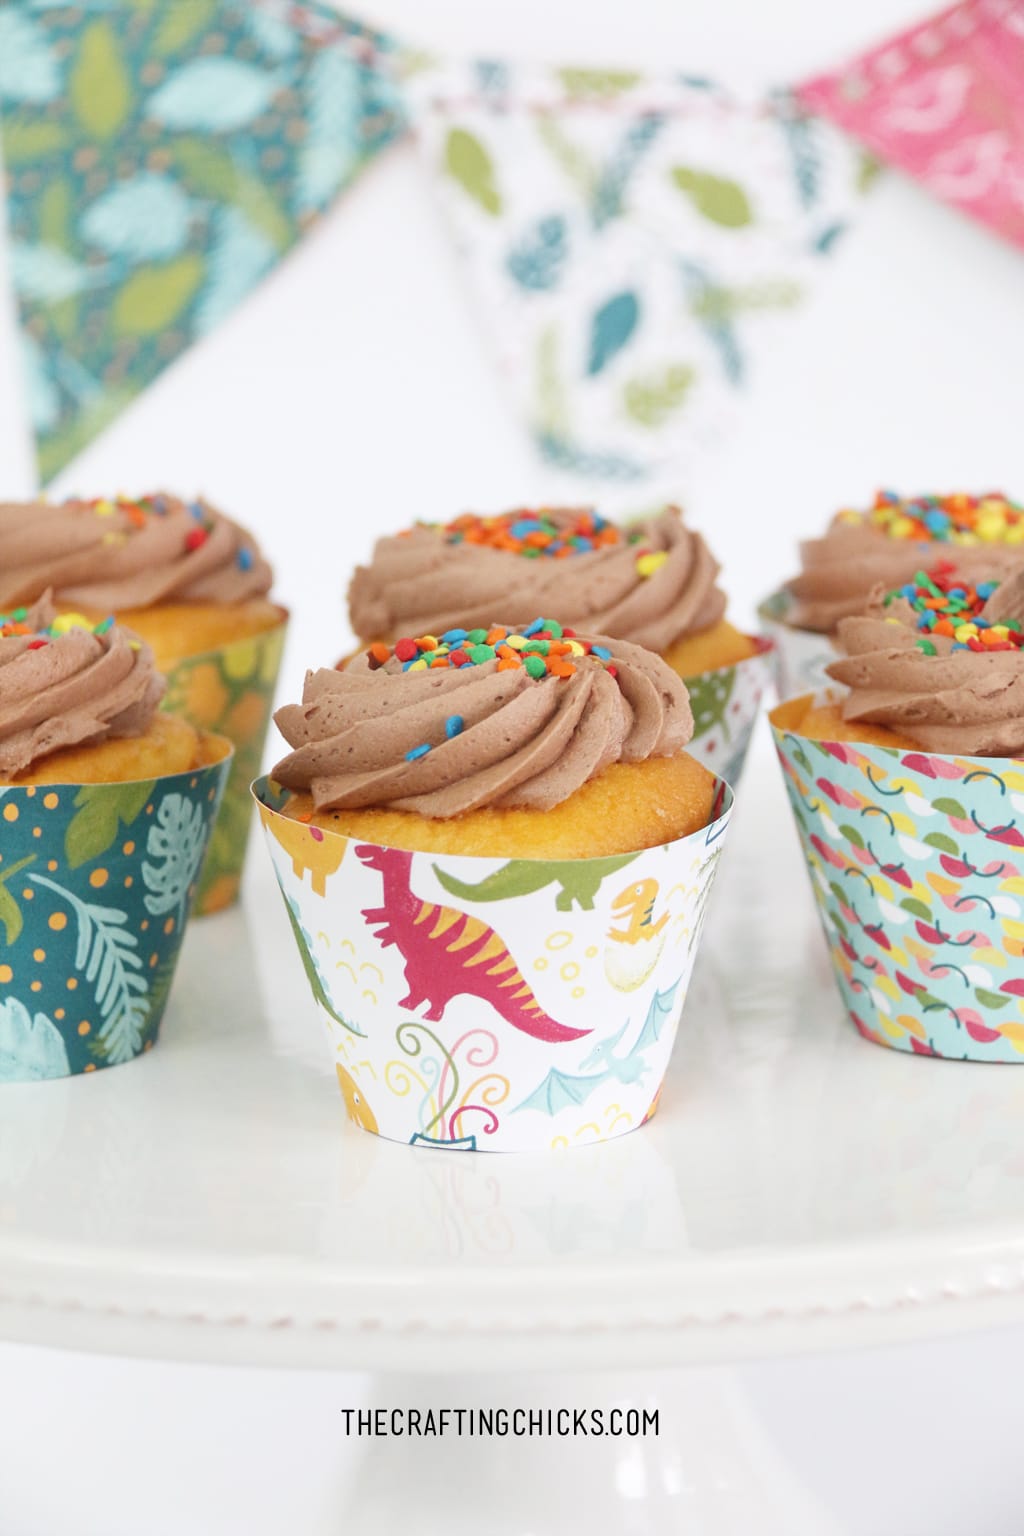 Cupcakes with chocolate frosting and DIY dinosaur cupcake paper wrappers.